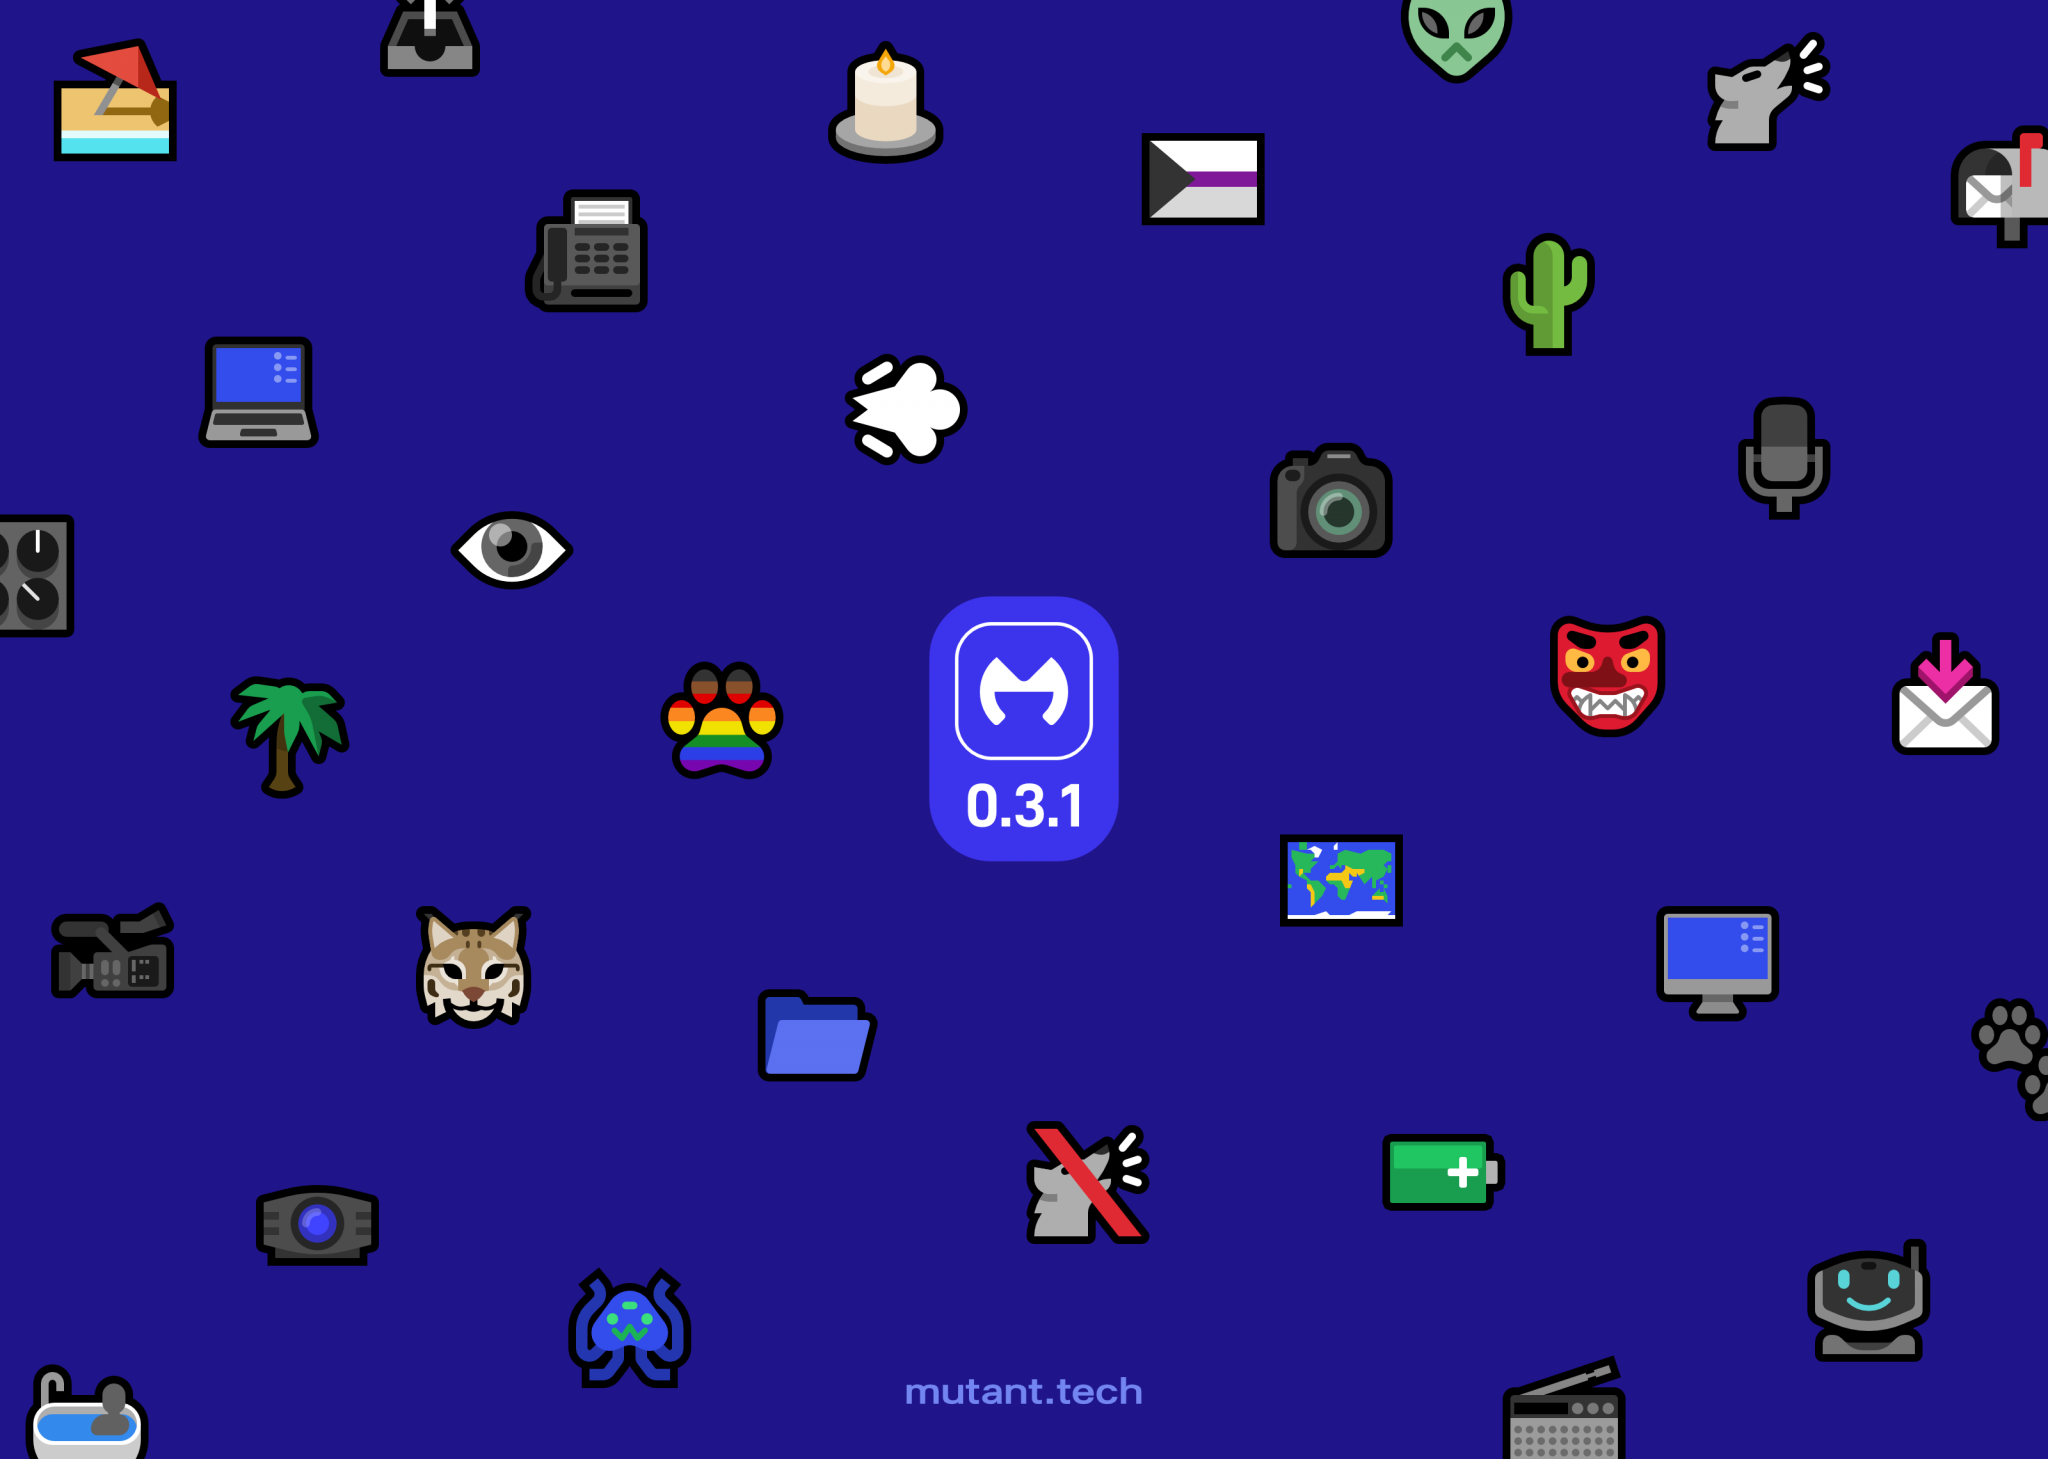 An array of new emoji in Mutant Standard 0.3.1 in a scattered pattern over a dark blue background. In the middle is a little blue badge with the Mutant Standard logo and '0.3.1' below it. At the bottom is 'mutant.tech', also in a light blue.